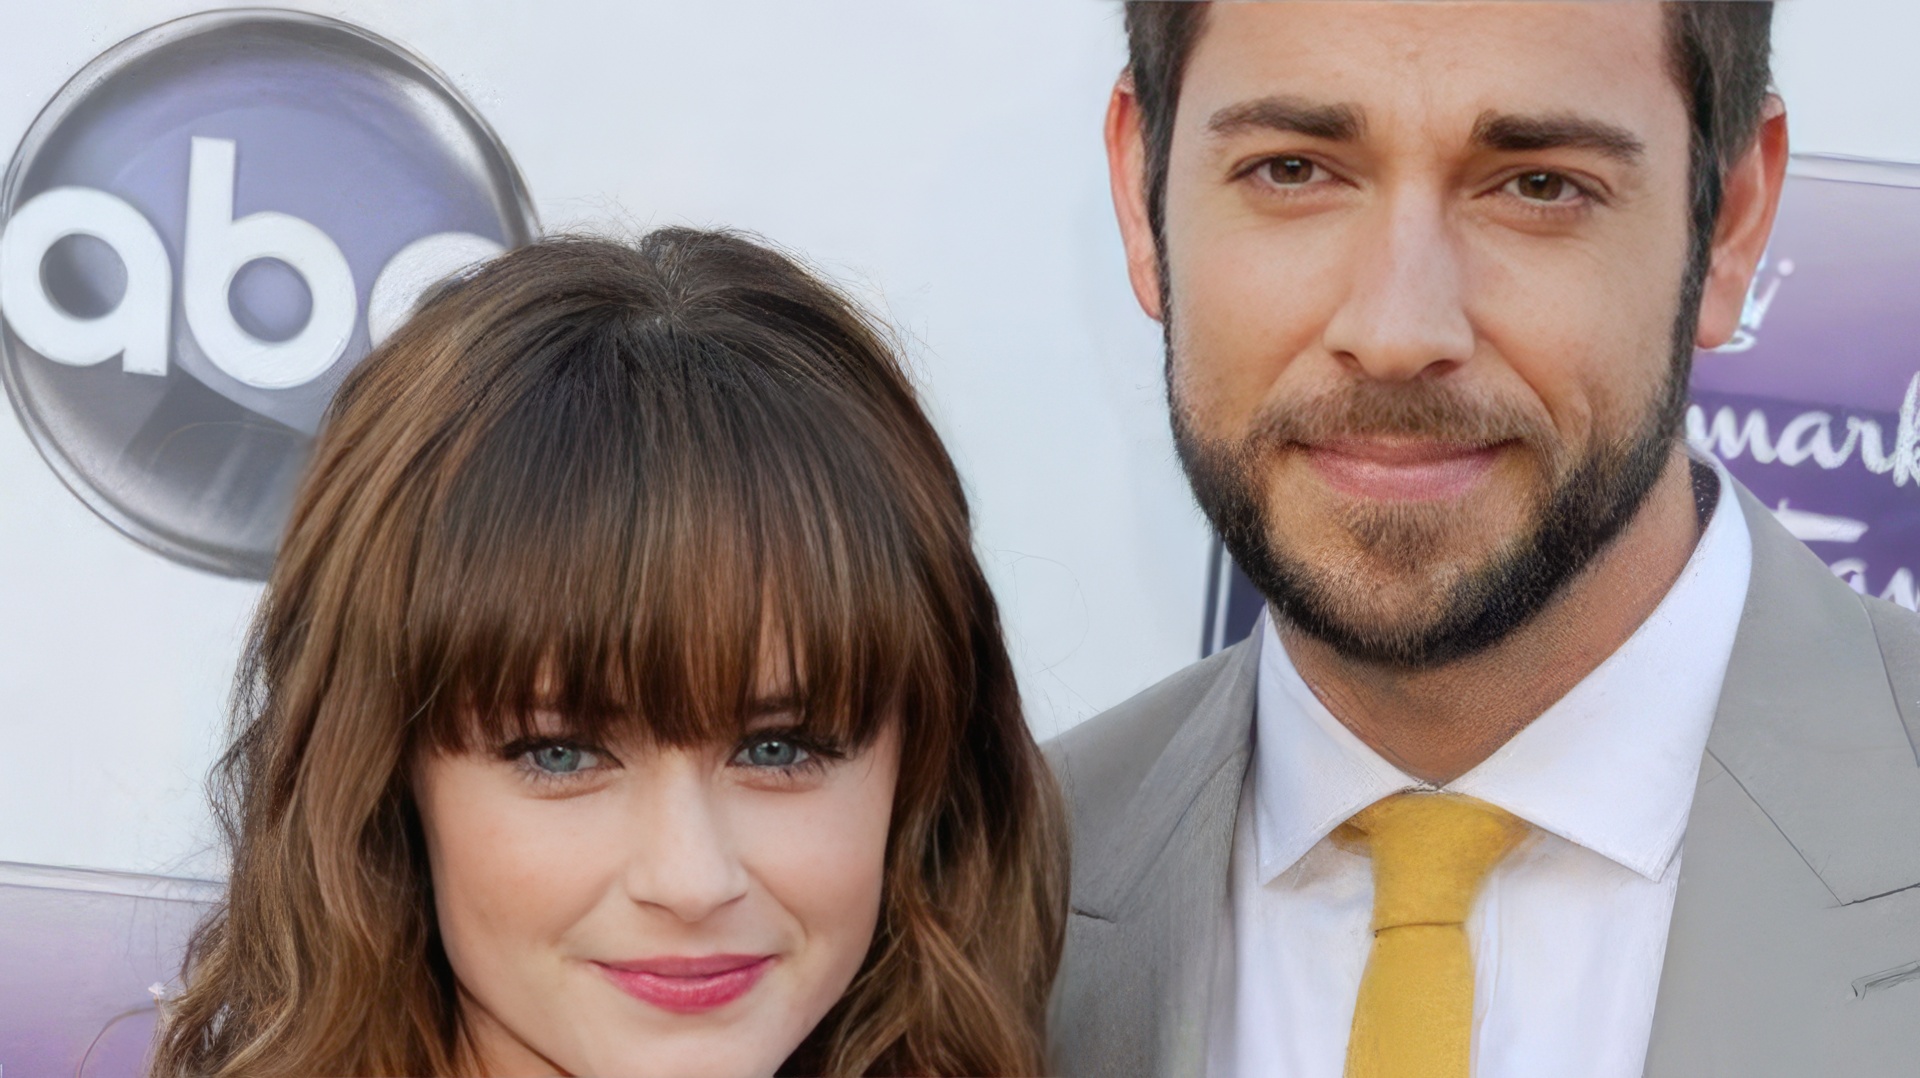 Alexis Bledel and Zachary Levi